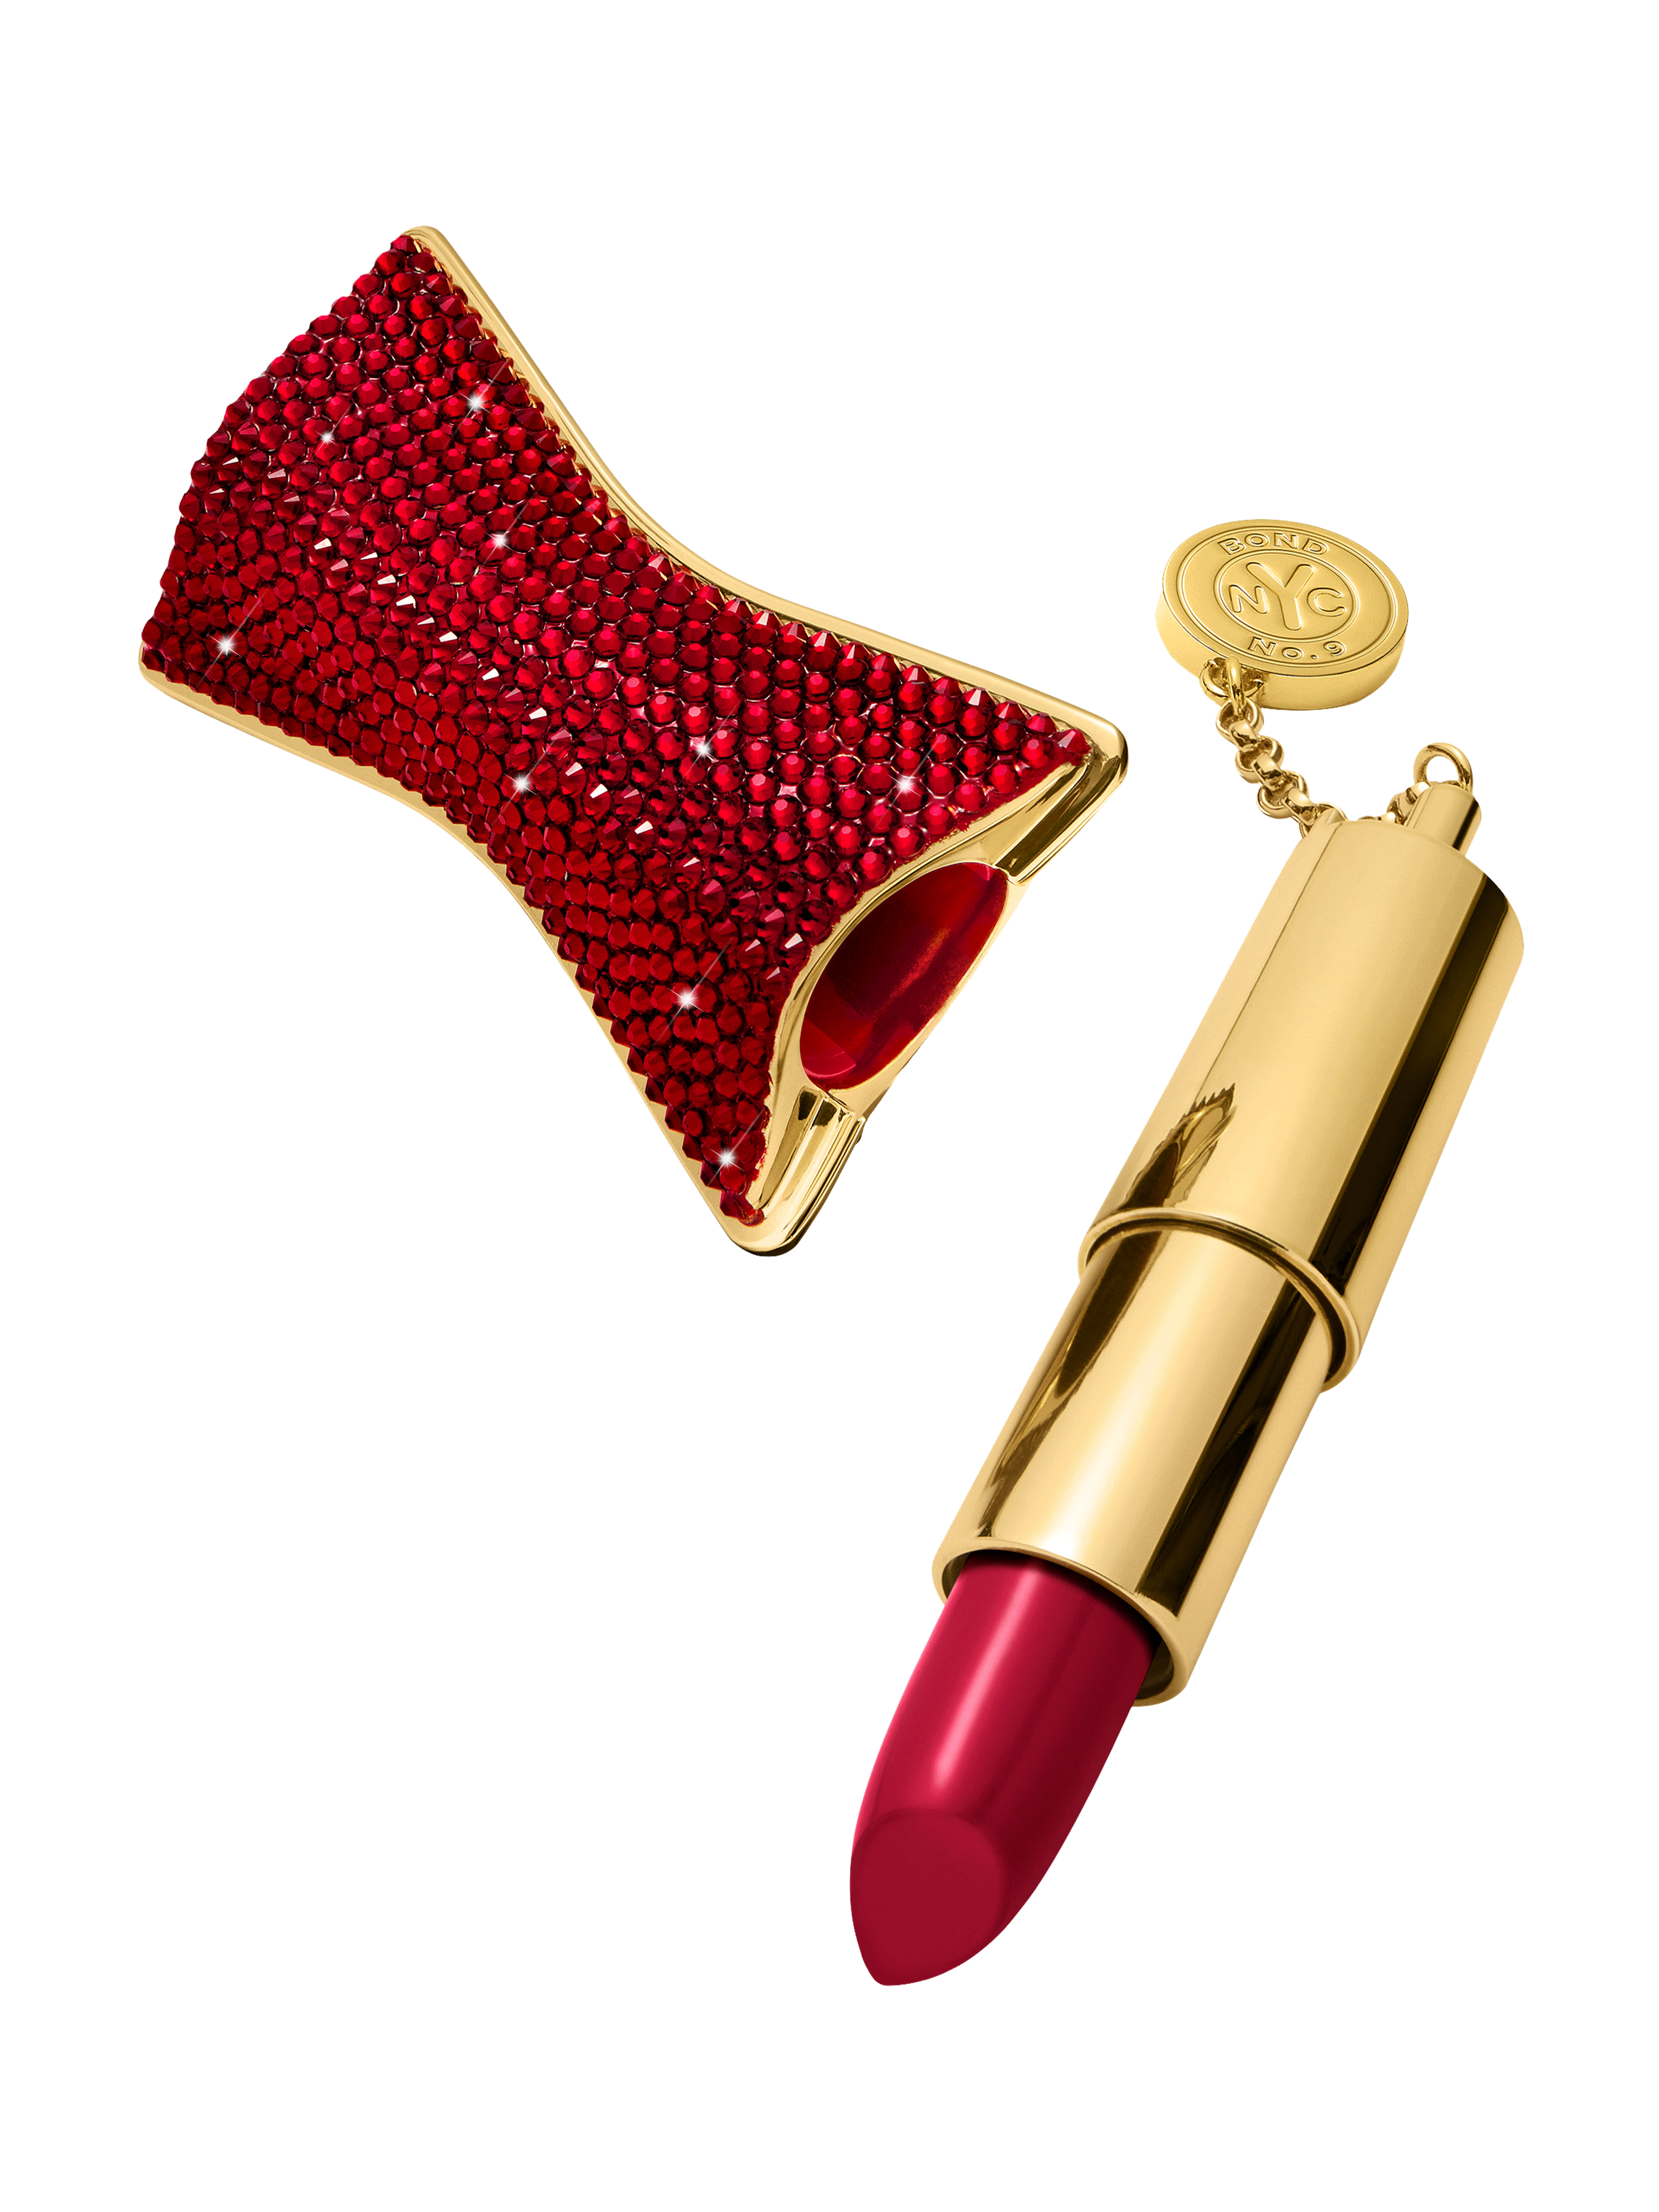 REFILLABLE LIPSTICK WITH SWAROVSKI® CRYSTALS - ASTOR PLACE